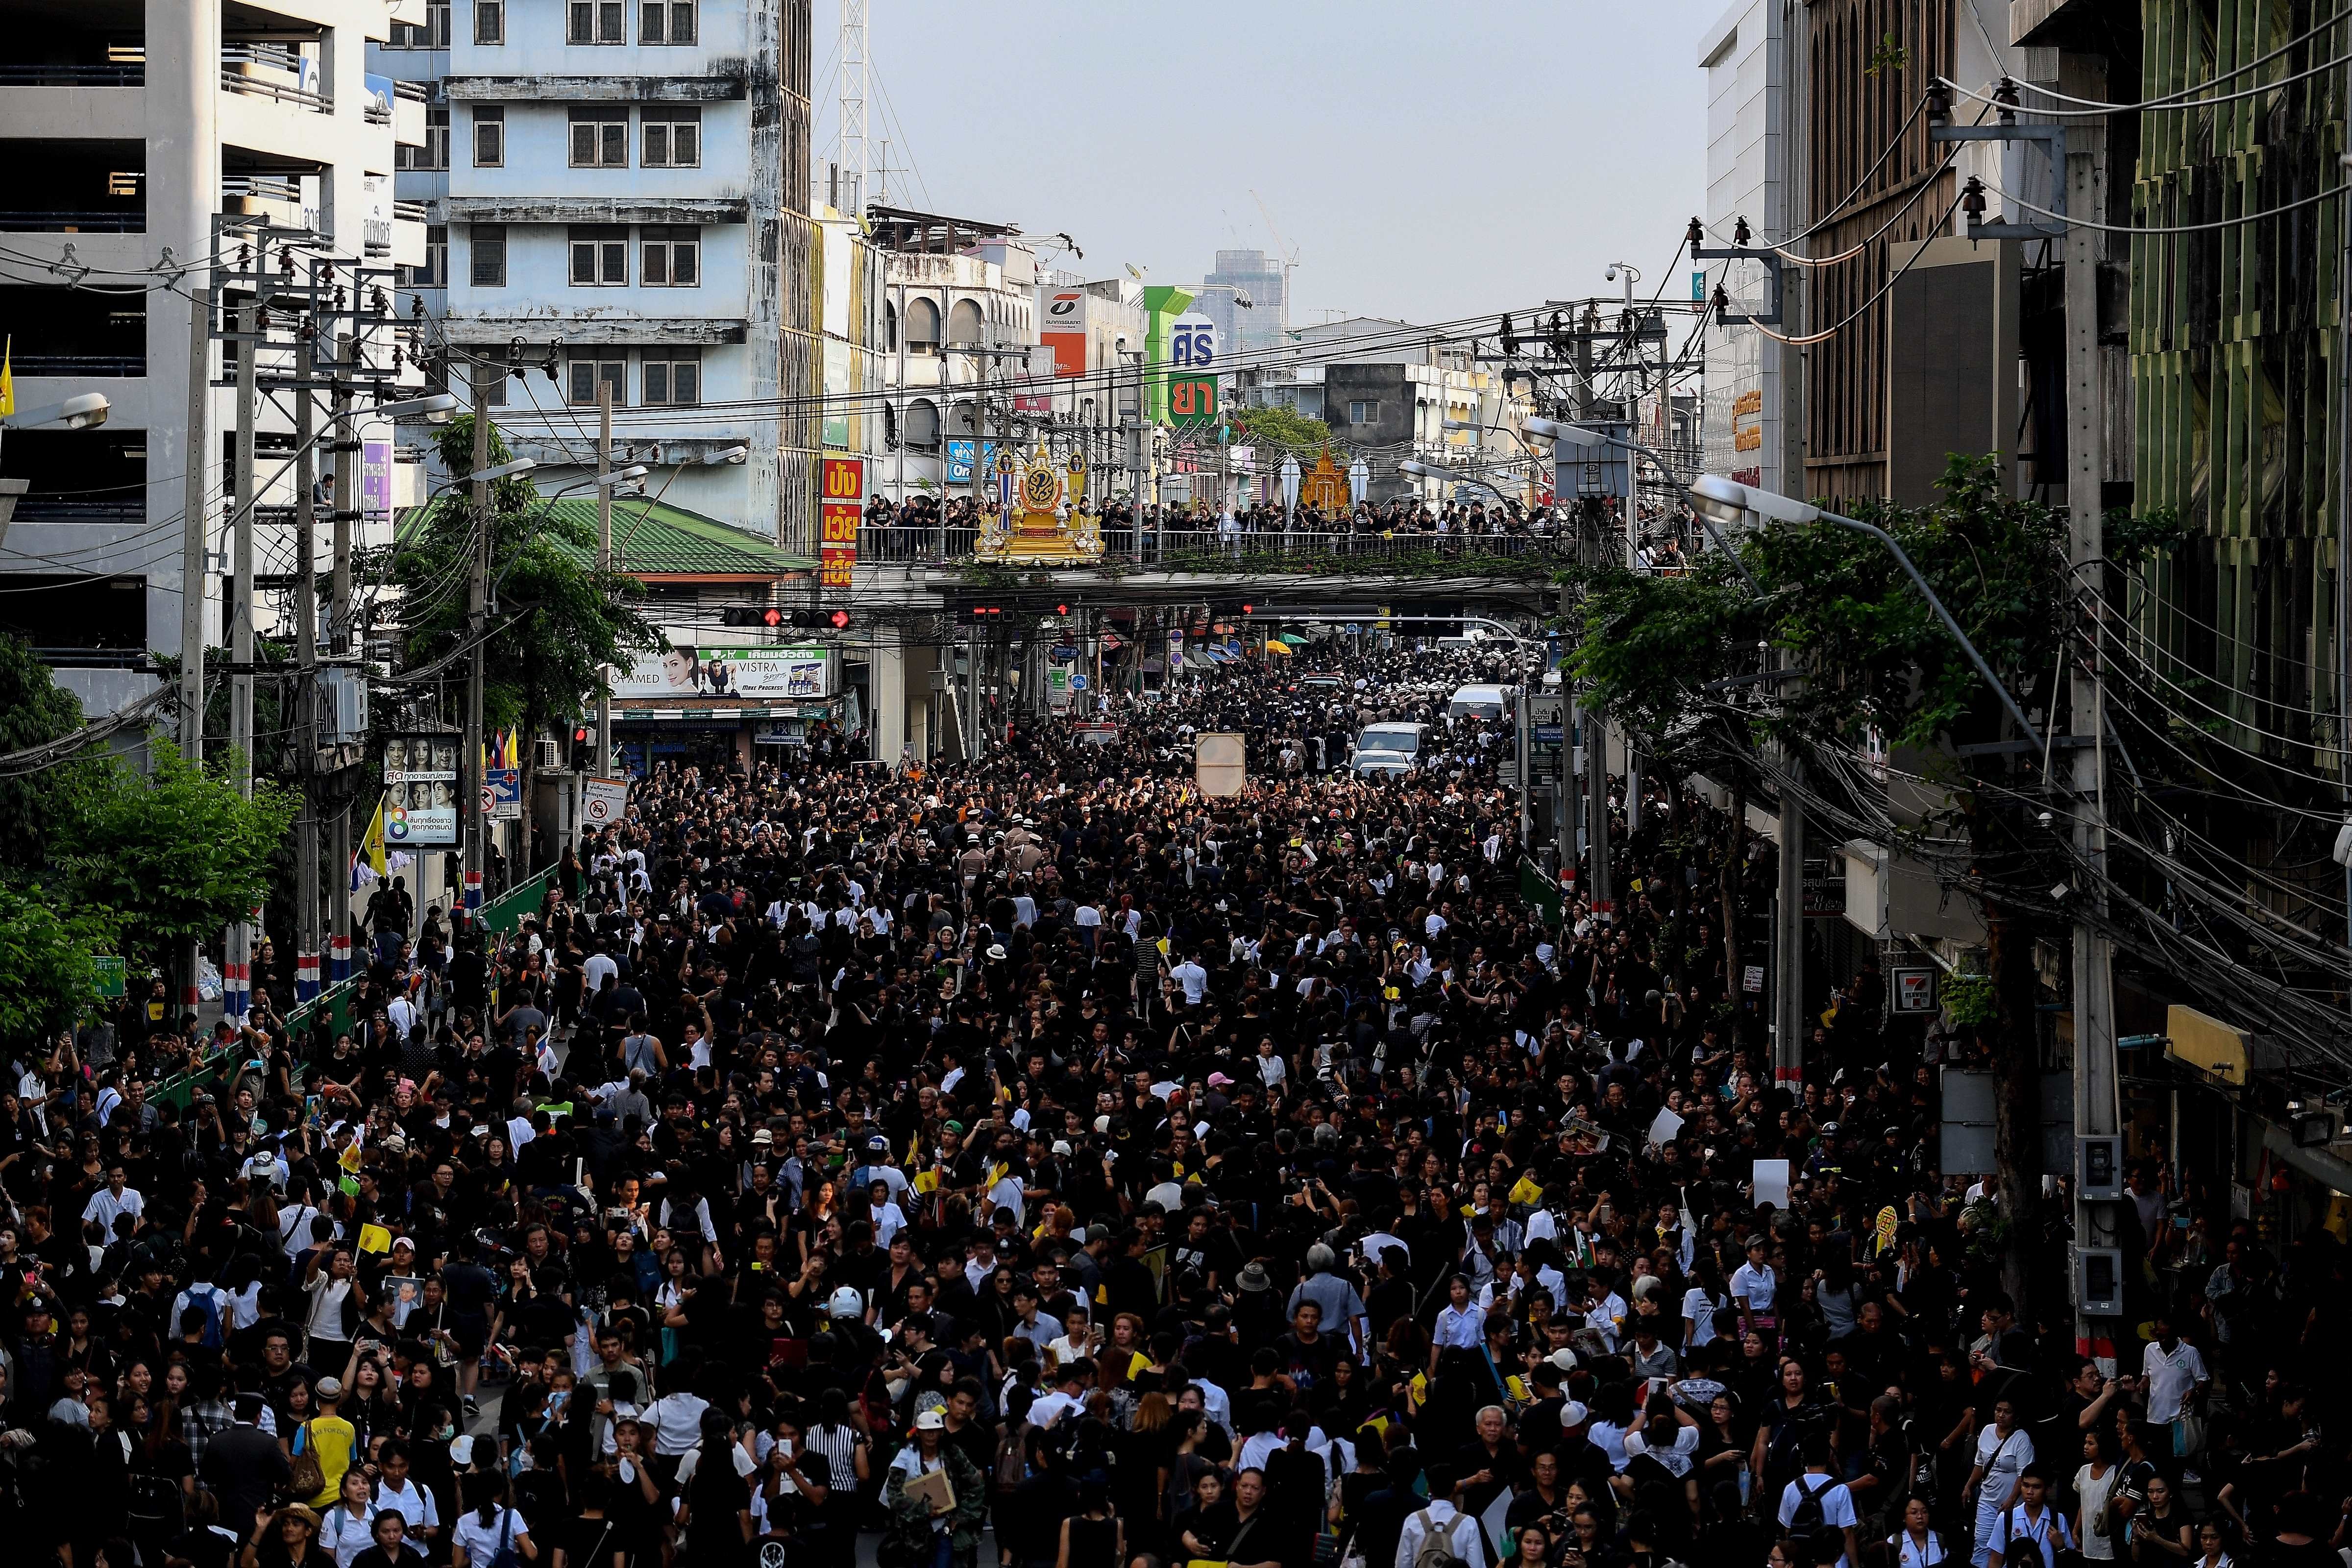 A general view shows thousands of people walking on the road after the procession of Thai King Bhumibol Adulyadej's body left the Siriraj Hospital for his palace in Bangkok on October 14, 2016. Bhumibol, the world's longest-reigning monarch, passed away aged 88 on October 13, 2016 after years of ill health, removing a stabilising father figure from a country where political tensions remain two years after a military coup. / AFP PHOTO / MANAN VATSYAYANA